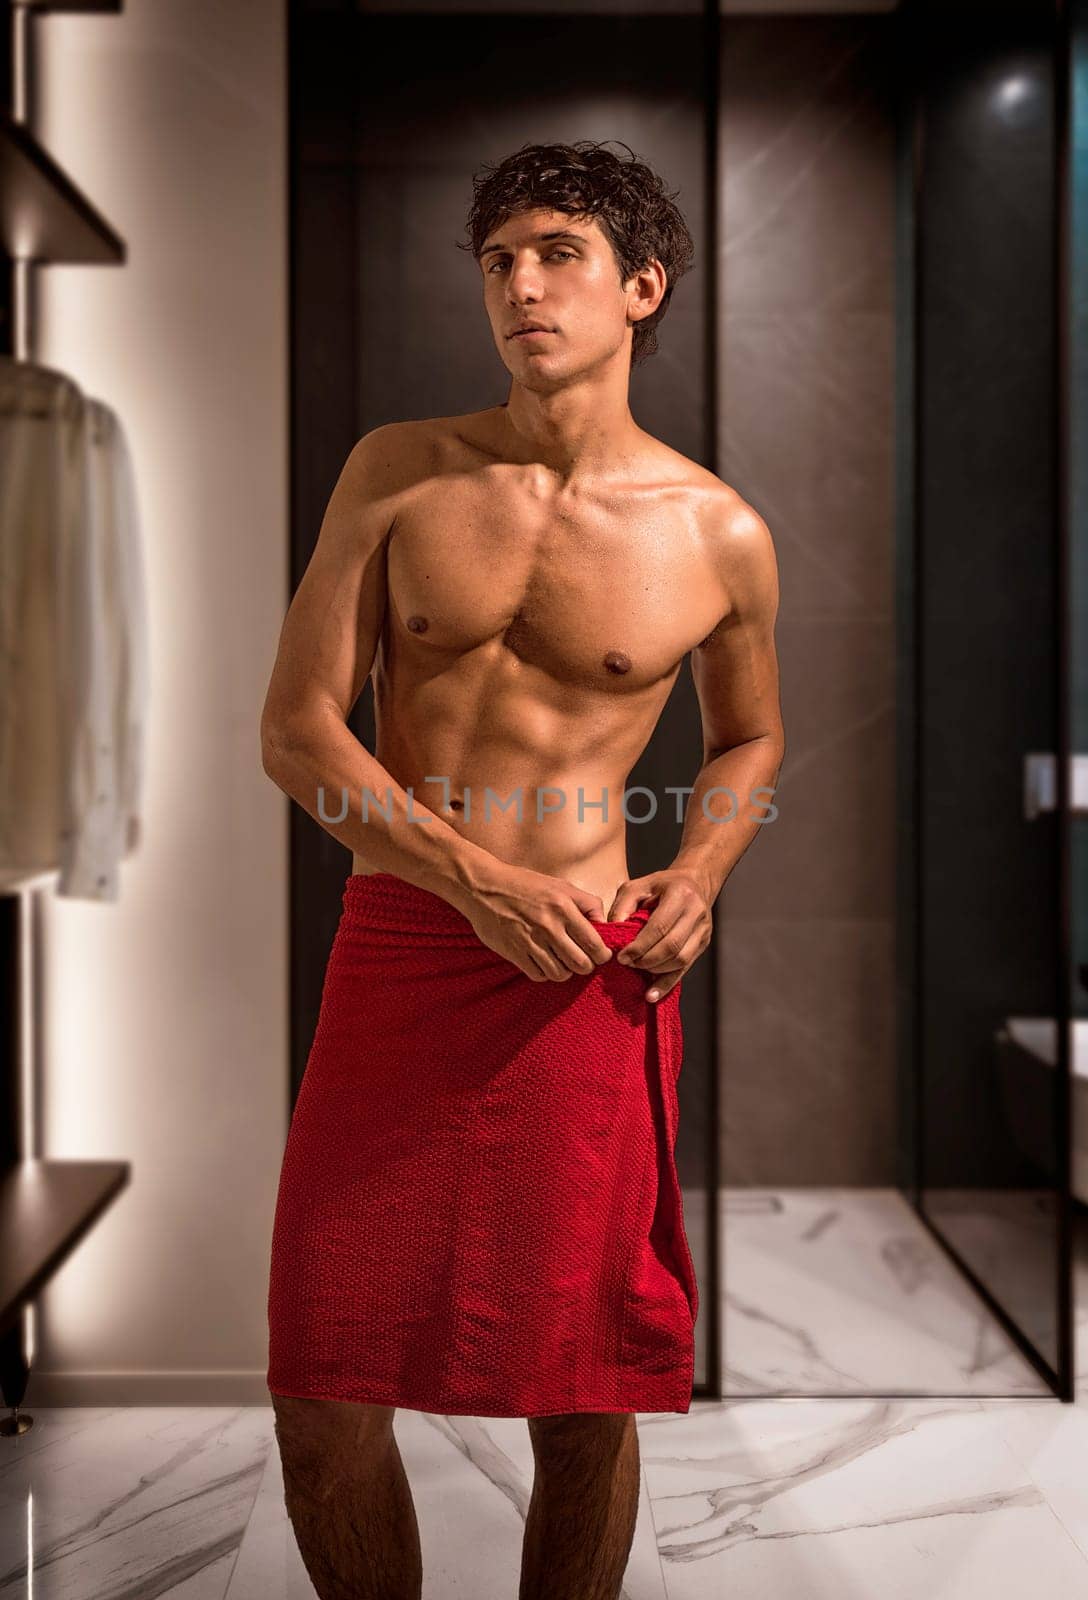 Handsome shirtless athletic fit young man going out of shower in room, with red towel wrapped around his waist